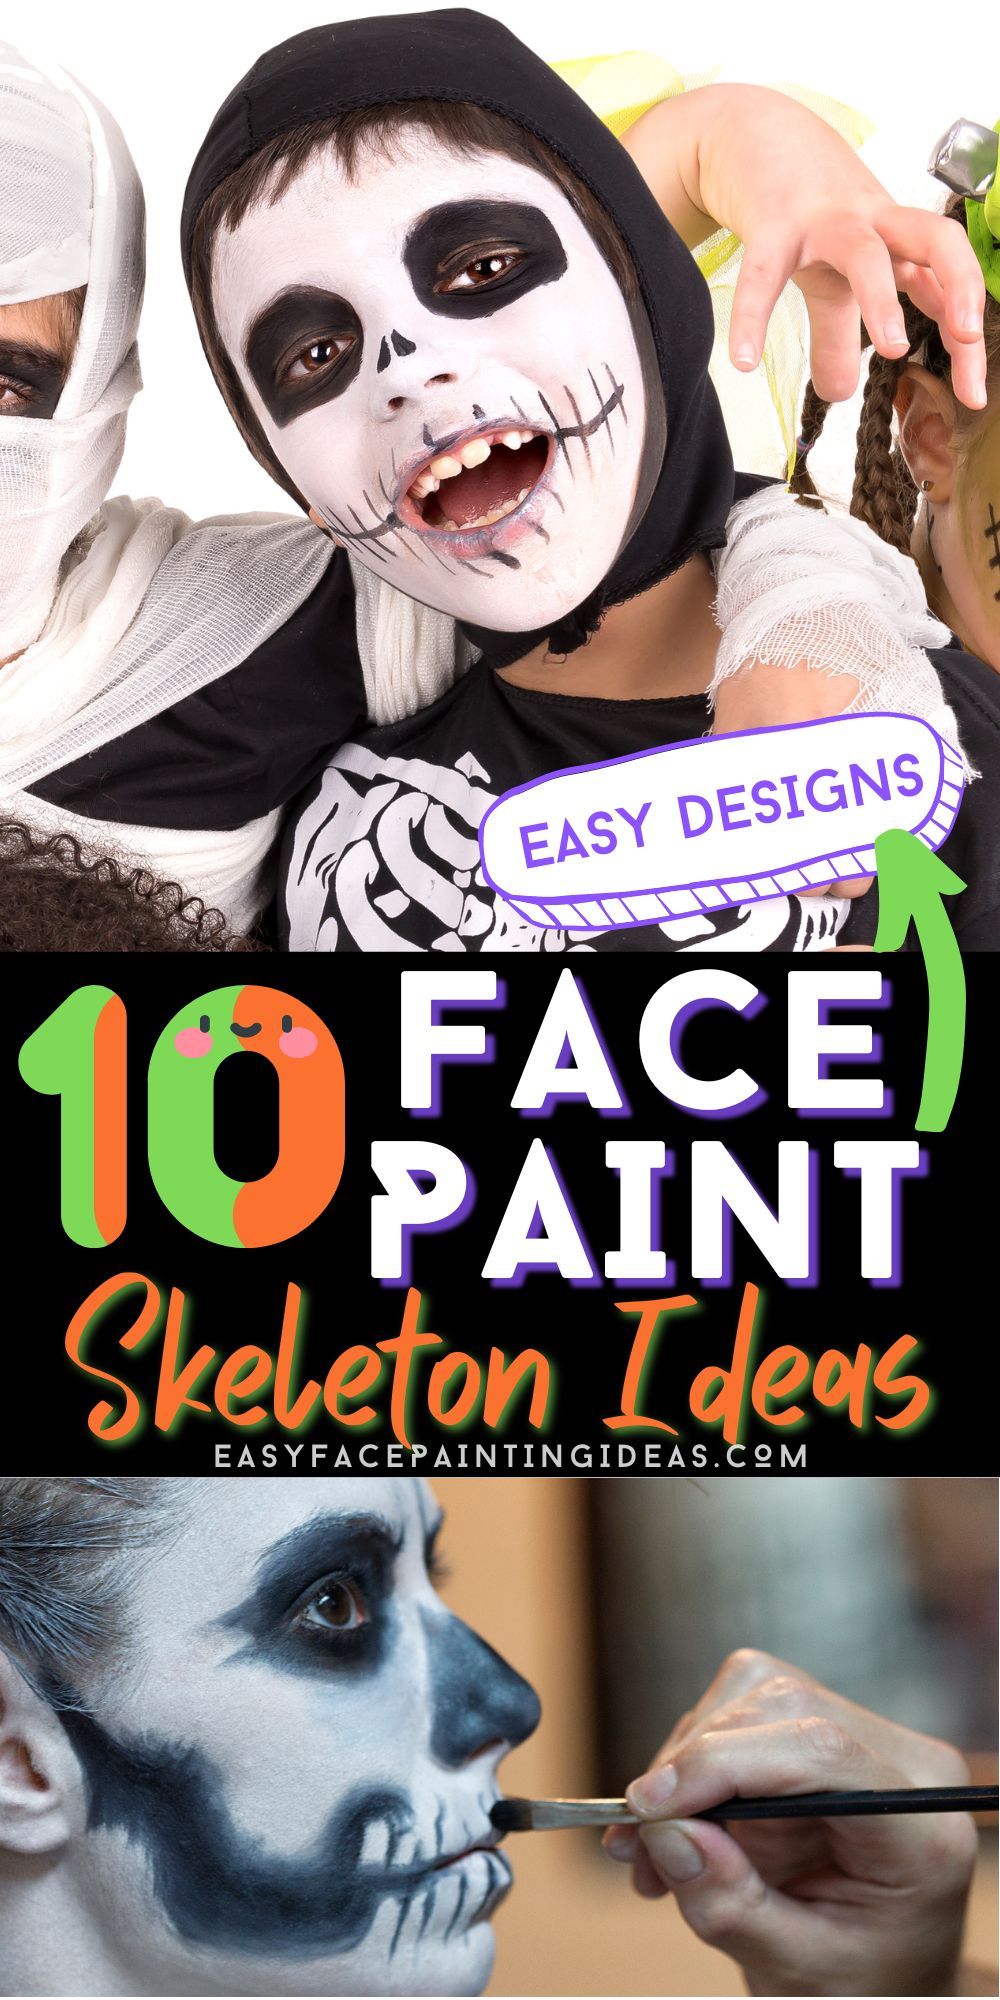 collage image with two photos--one shows a child with skeleton face paint, and another shows an adult getting their face painted in a skeleton design for Halloween. An overlay reads, "10 Face Paint Skeleton Ideas: Easy Designs"